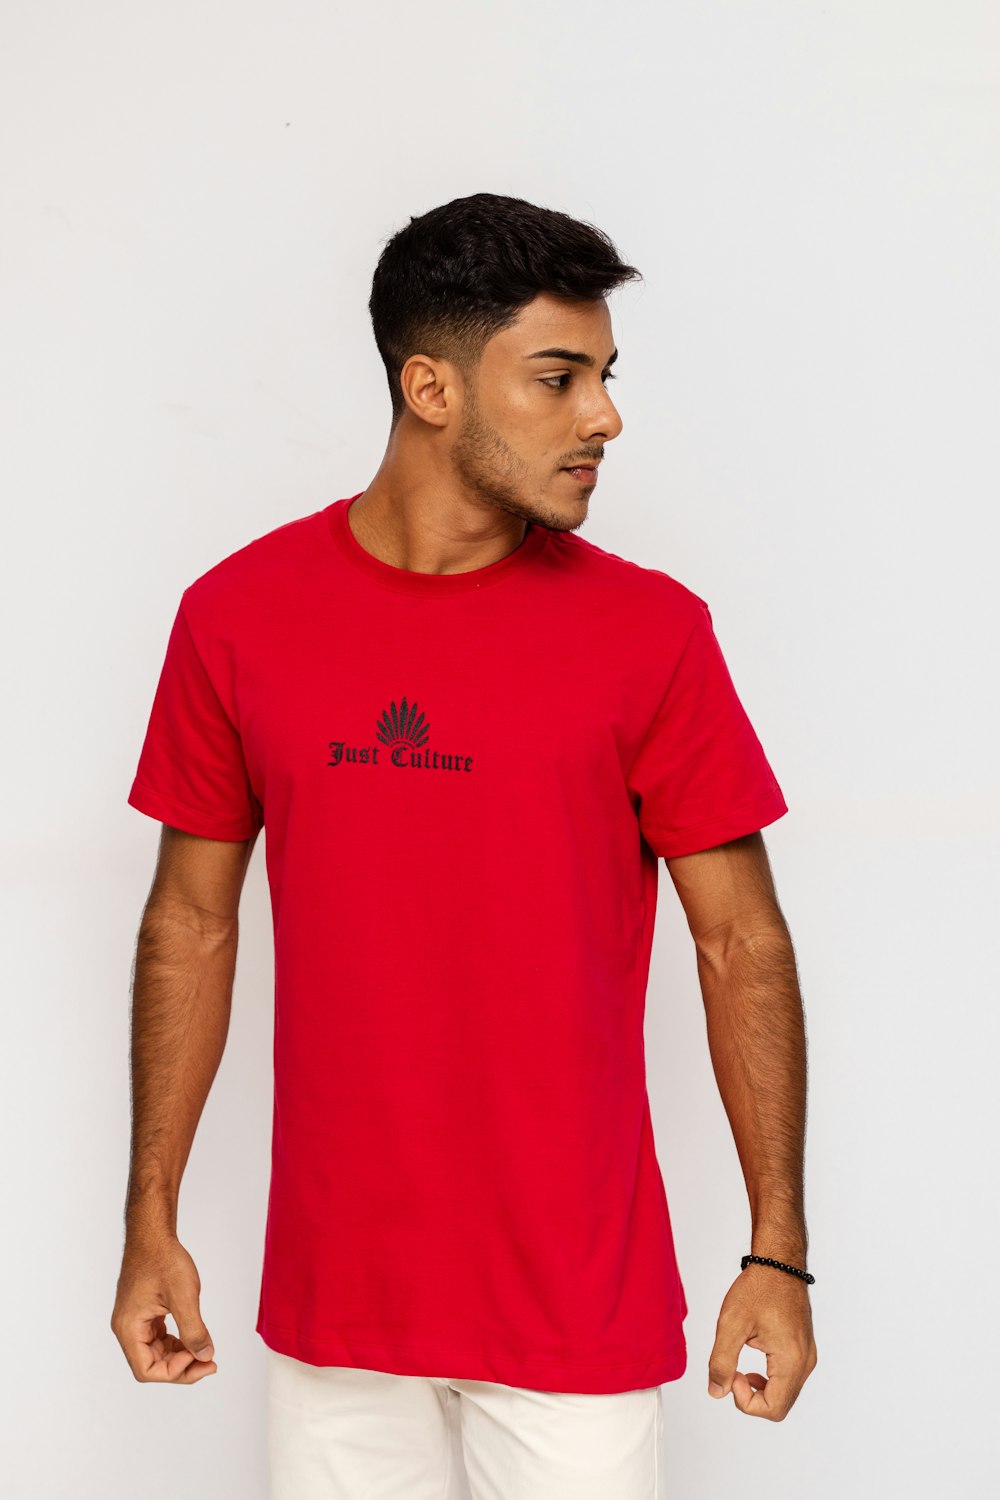 man in red crew neck t-shirt